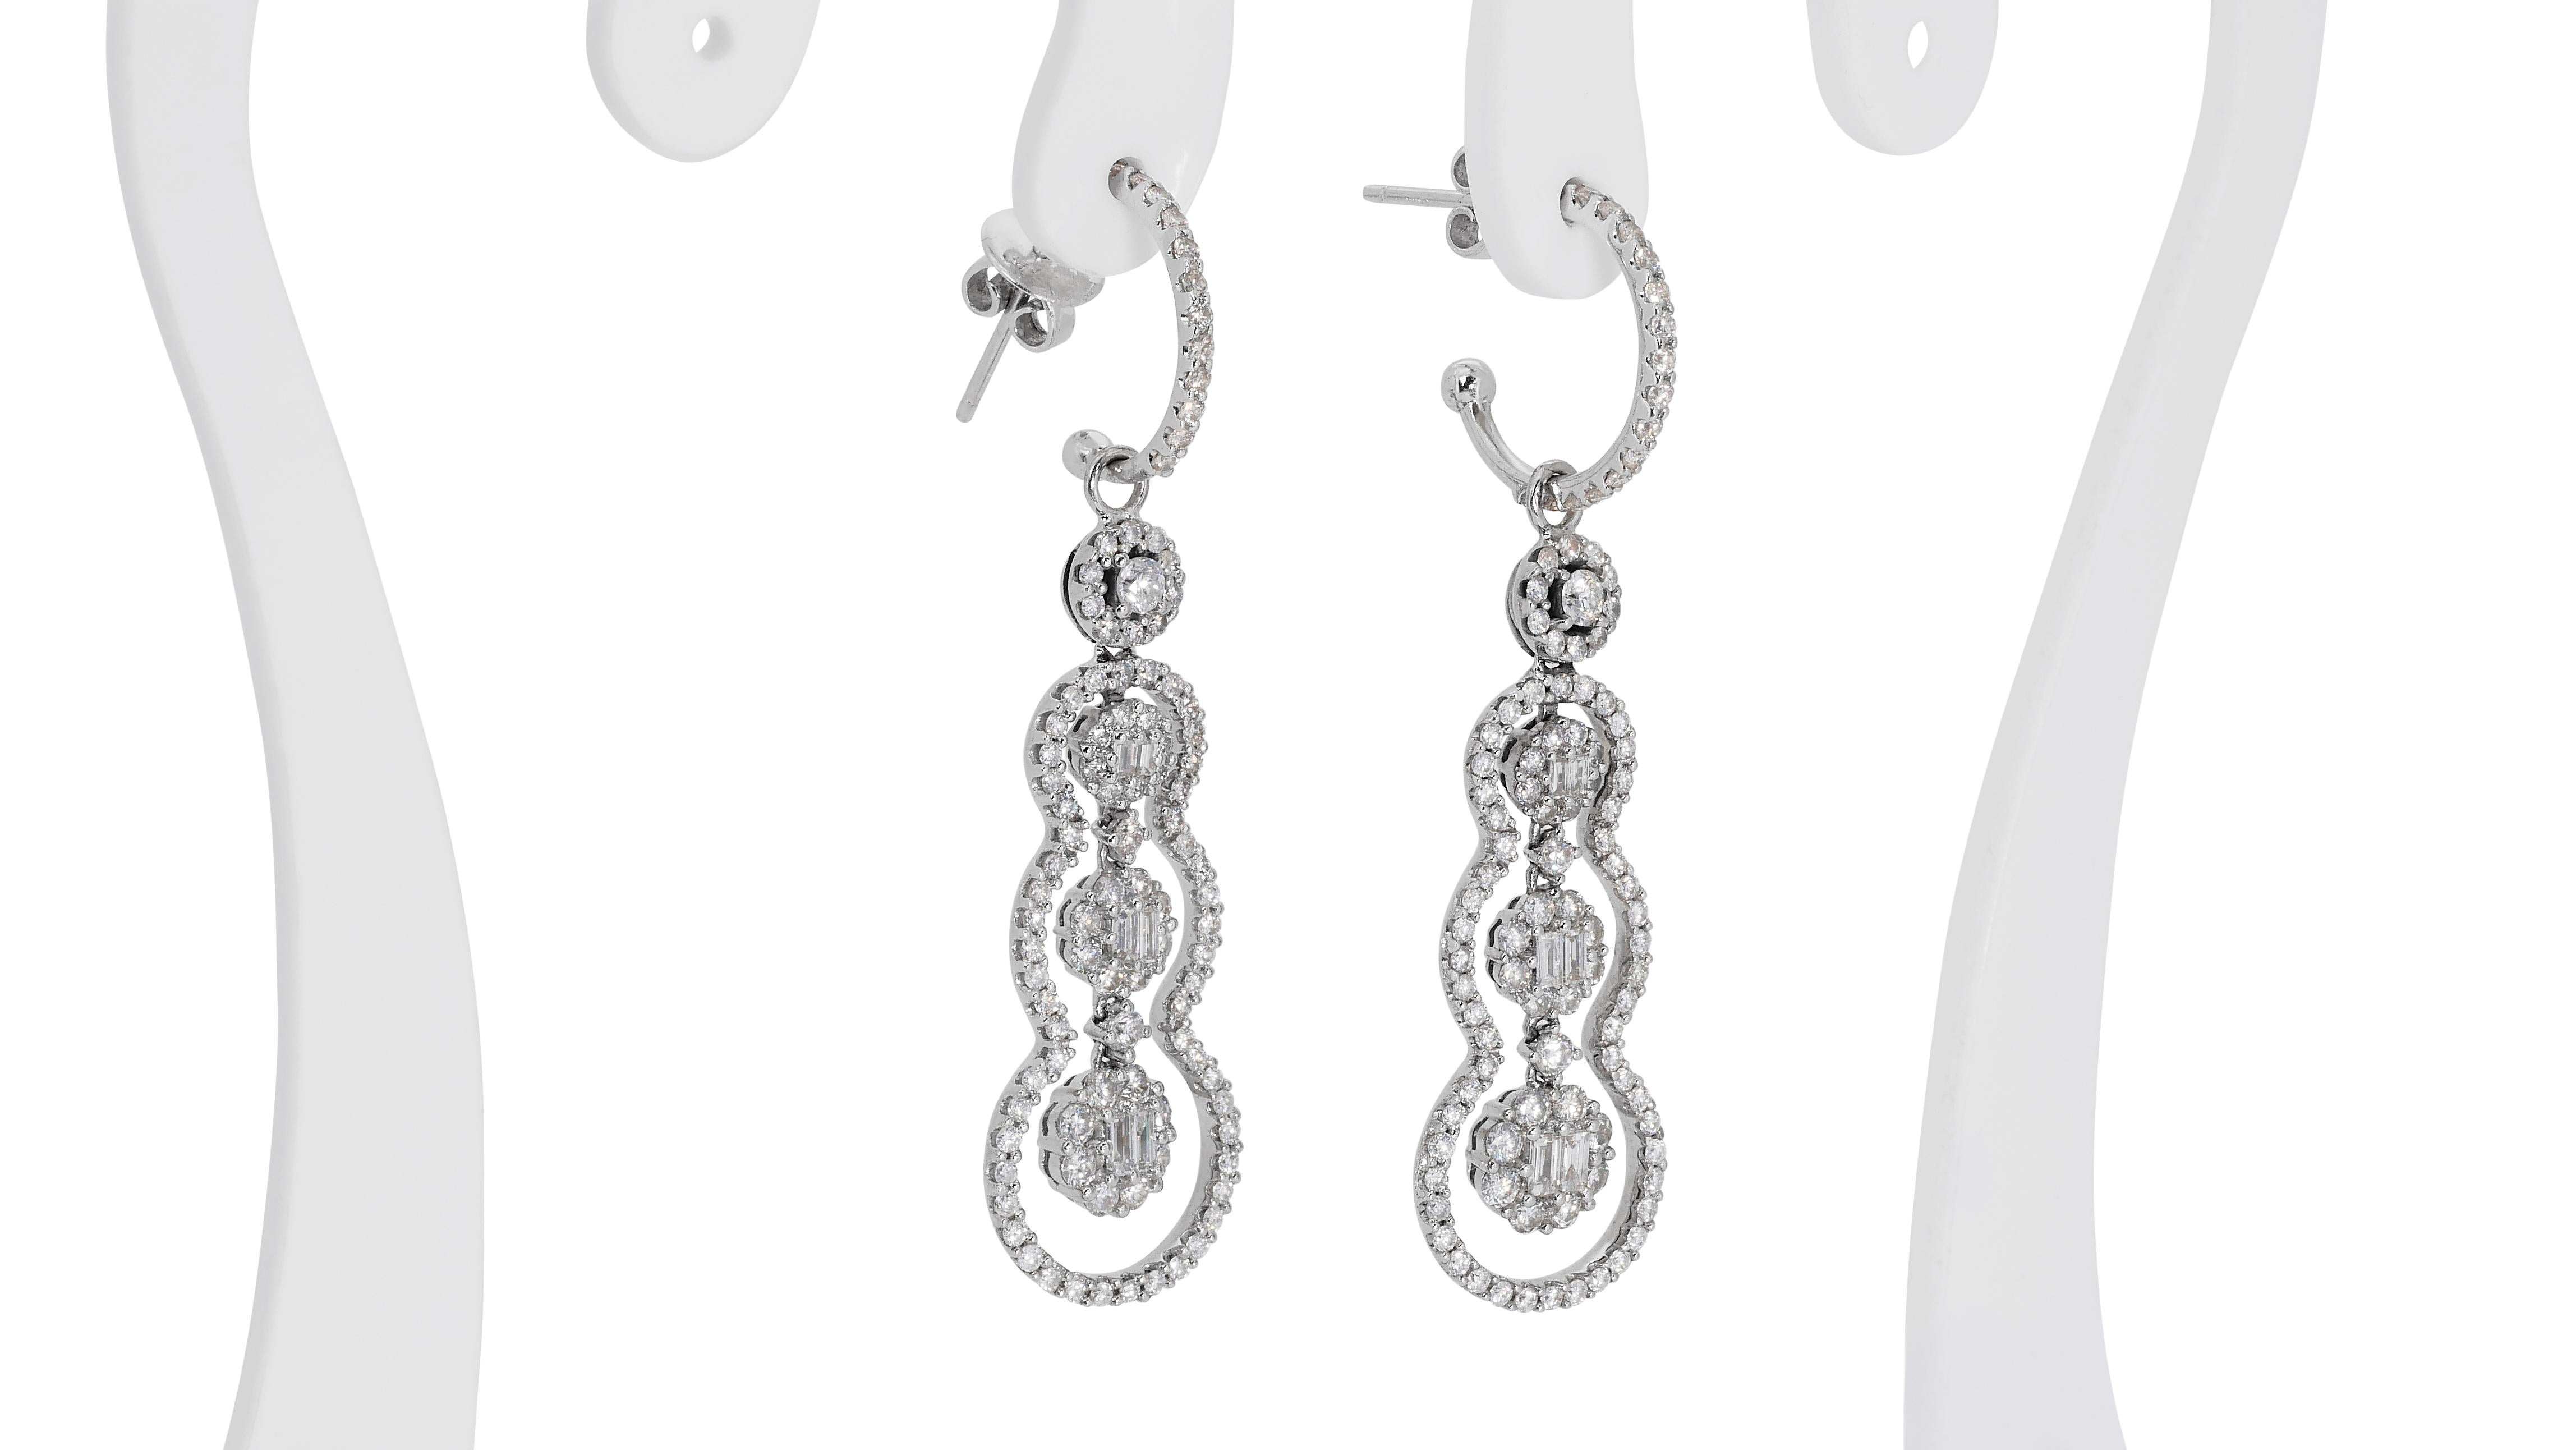 Marvelous 18k White Gold Drop Earrings w/ 3.5ct Natural Diamonds AIG Certificate For Sale 1